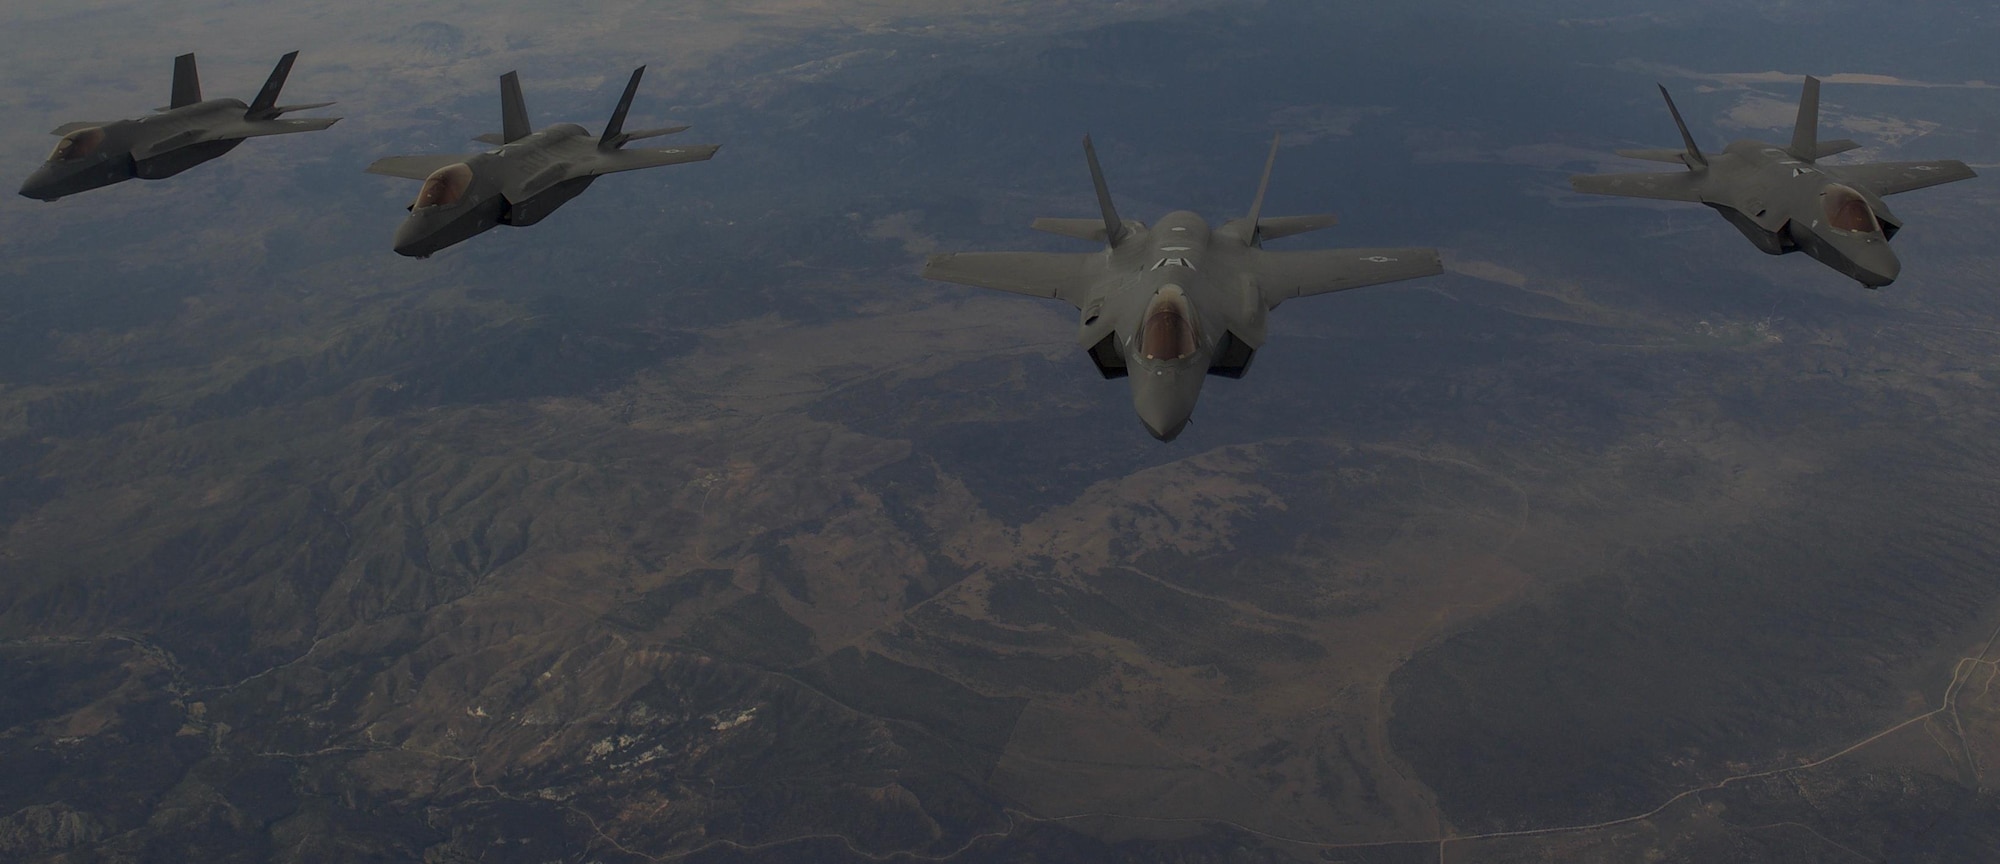 F-35 Lightning II fighter jets, assigned to the 6th Weapons Squadron, at Nellis Air Force Base, Nev., fly in formation over the Nevada Test and Training Range, Nev., July 10, 2017. The United States Air Force Weapons School teaches graduate-level instructor courses that provide the world's most advanced training in weapons and tactics employment to officers of the combat air forces and mobility air forces. (U.S. Air Force photo by Senior Airman Kevin Tanenbaum/Released)